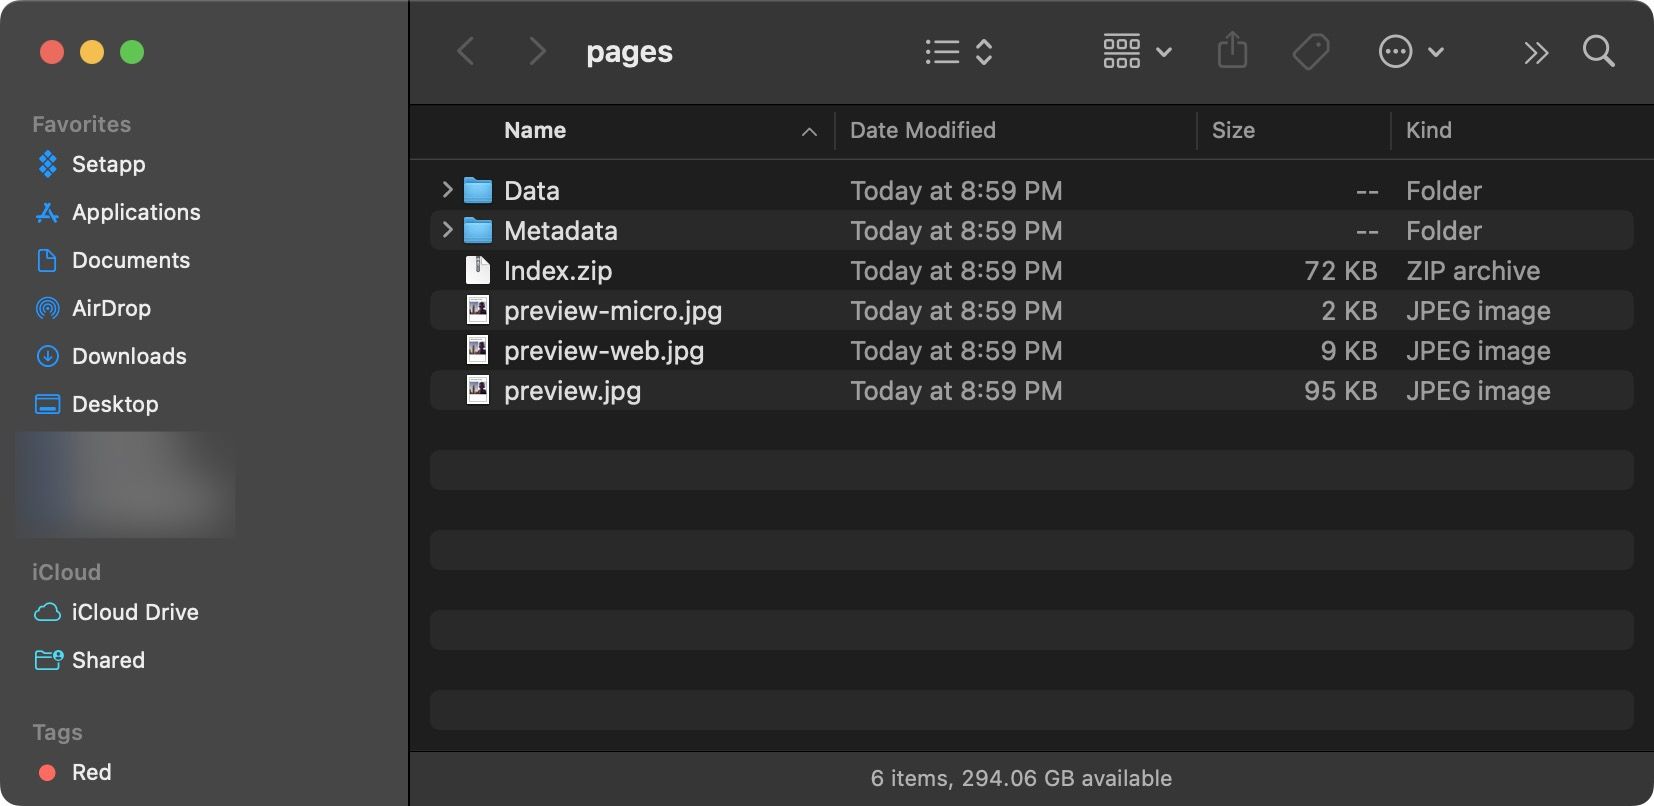 Export all images at once from Pages on Mac 4